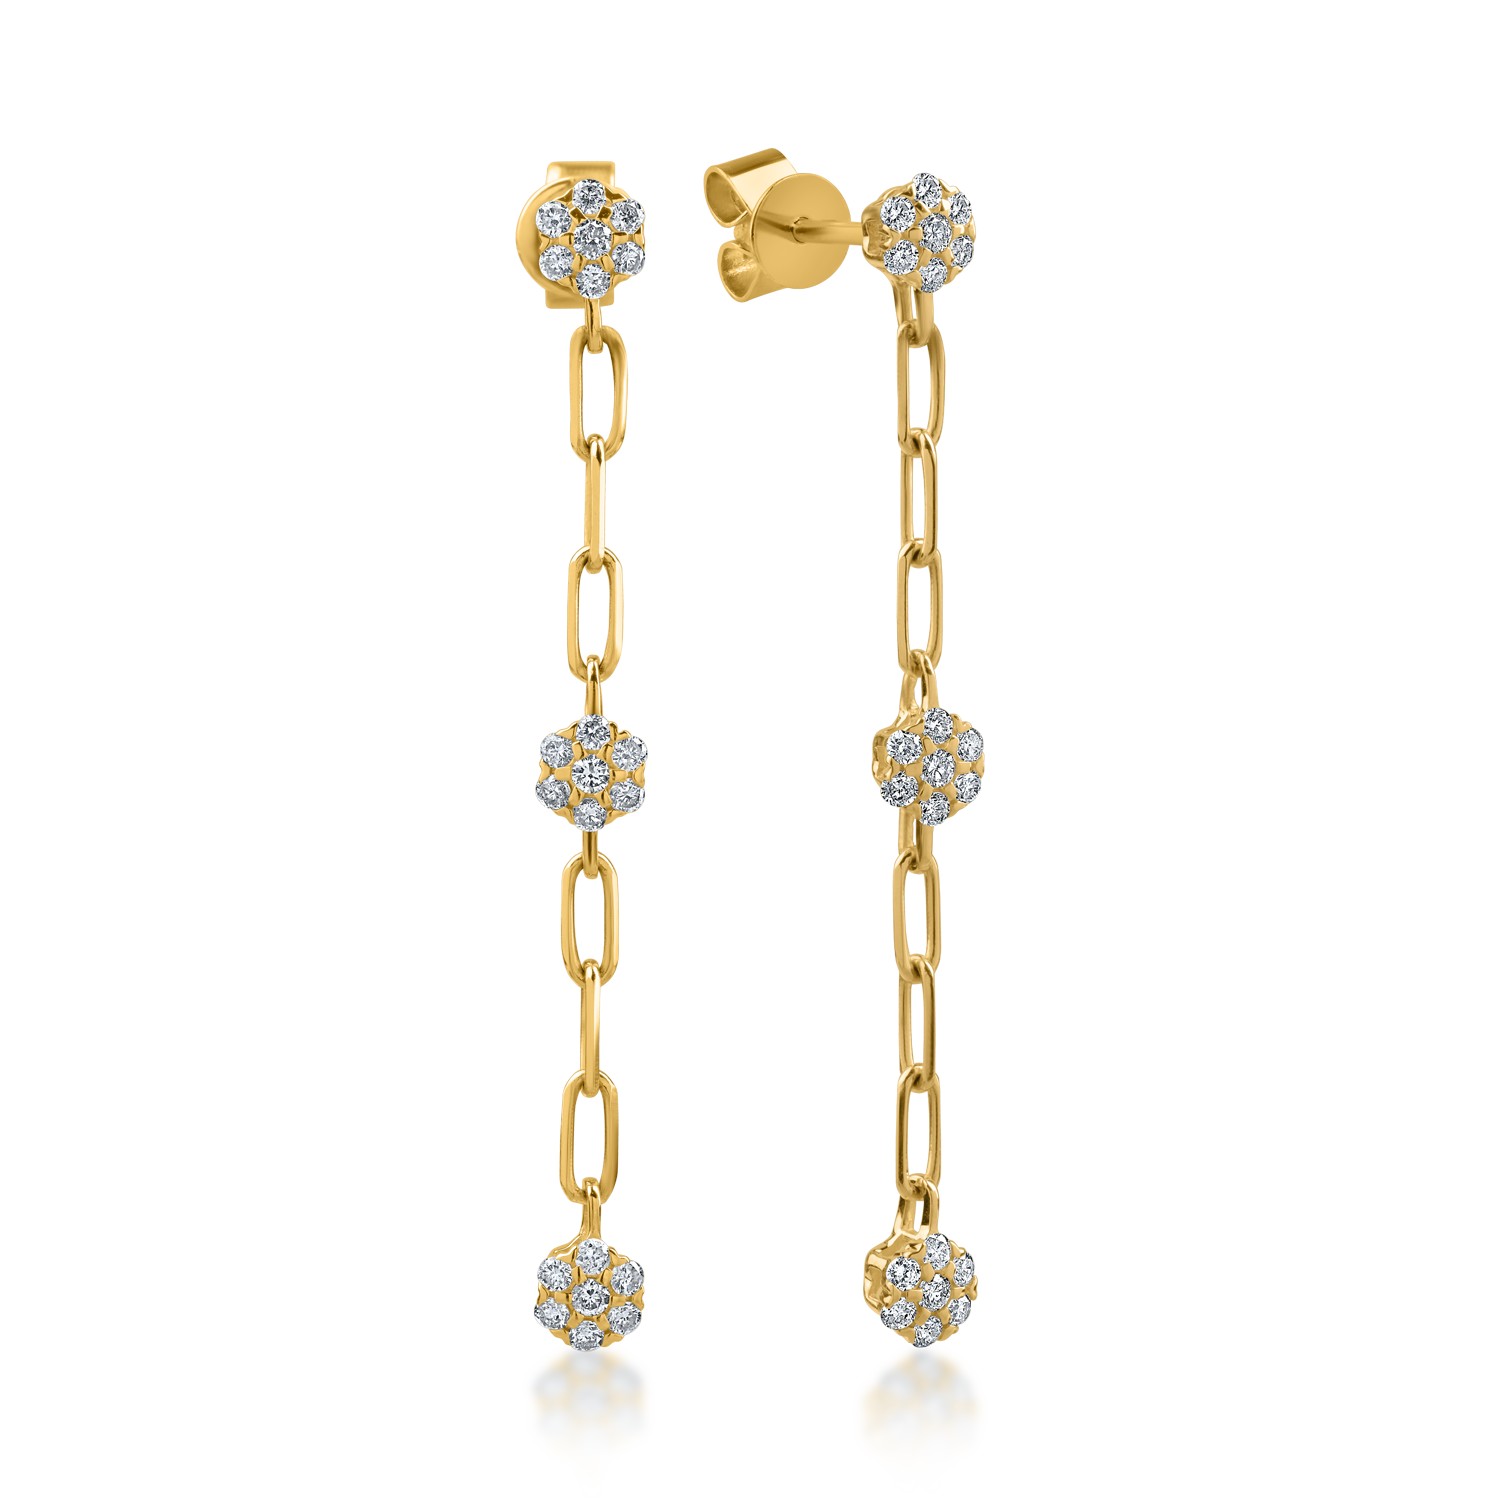 Yellow gold earrings with 0.29ct diamonds